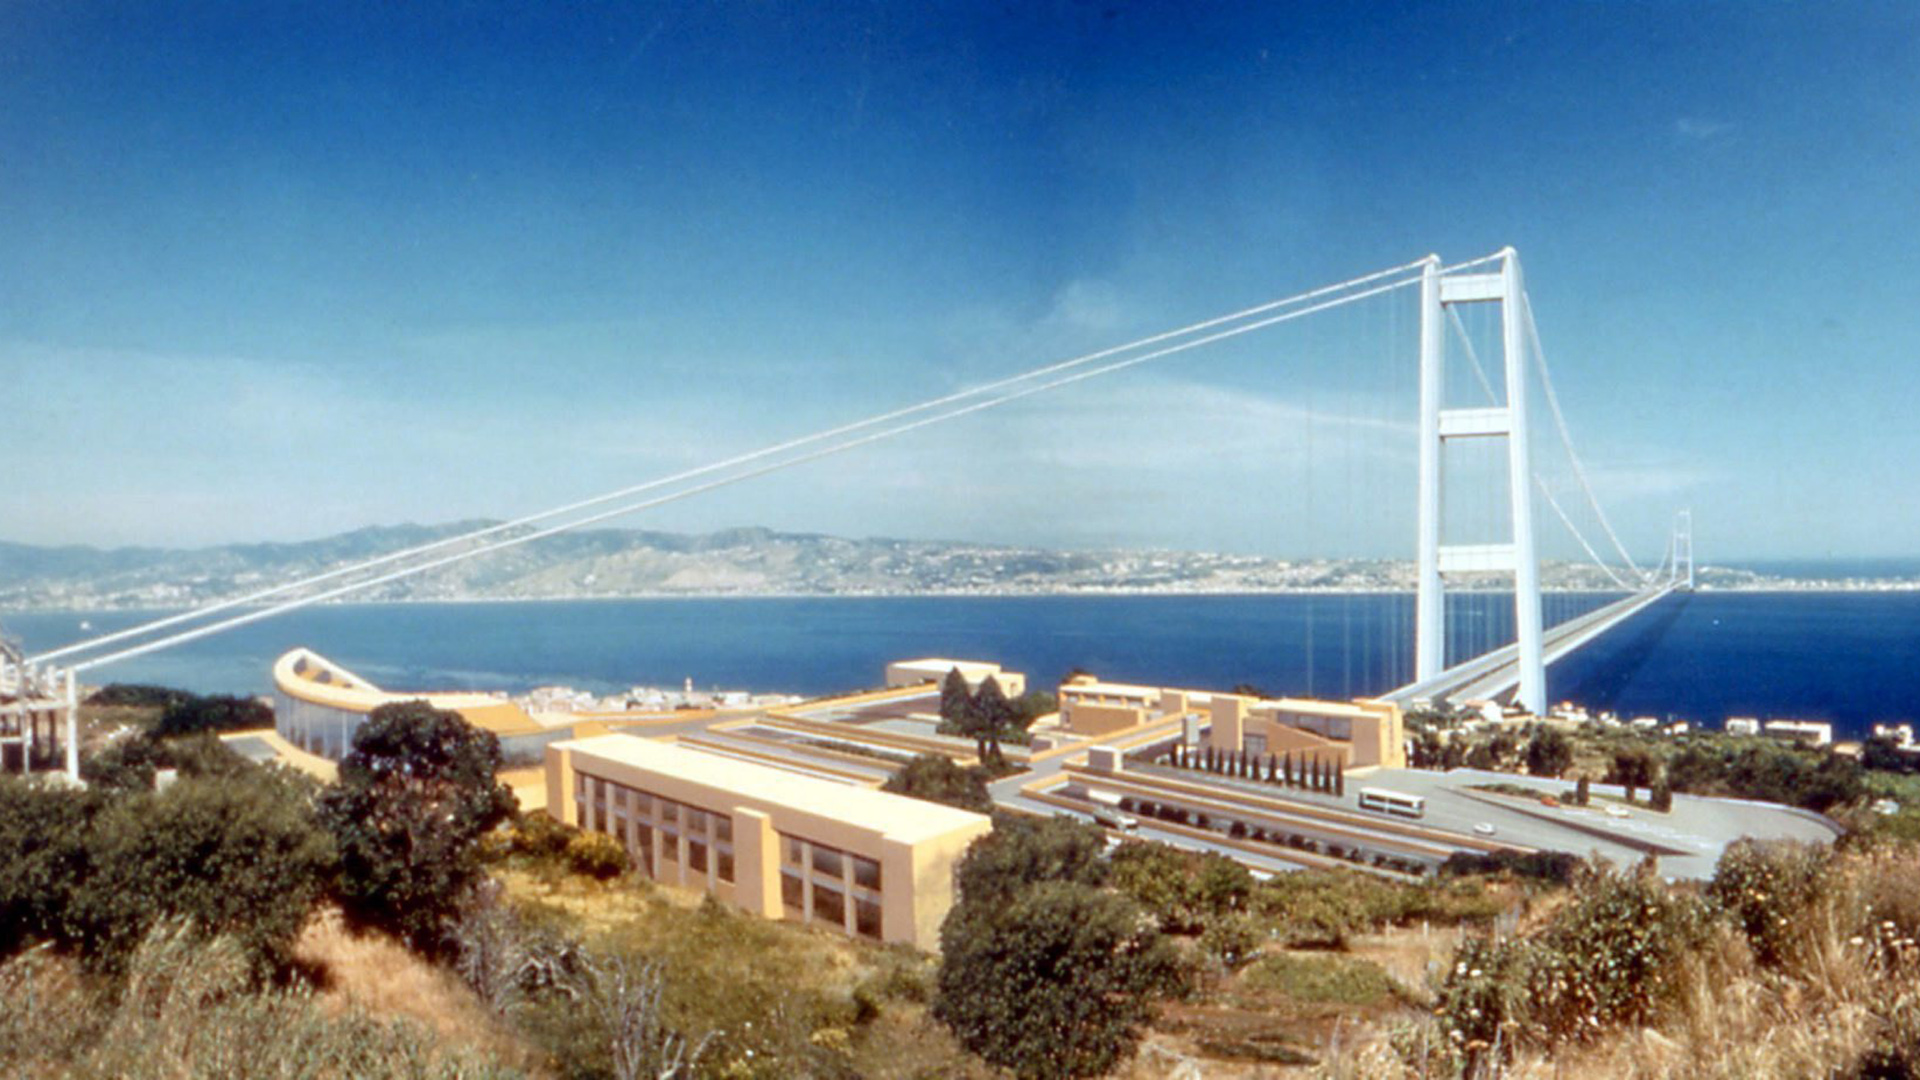 Controversial government project: Italy wants to build a bridge to Sicily